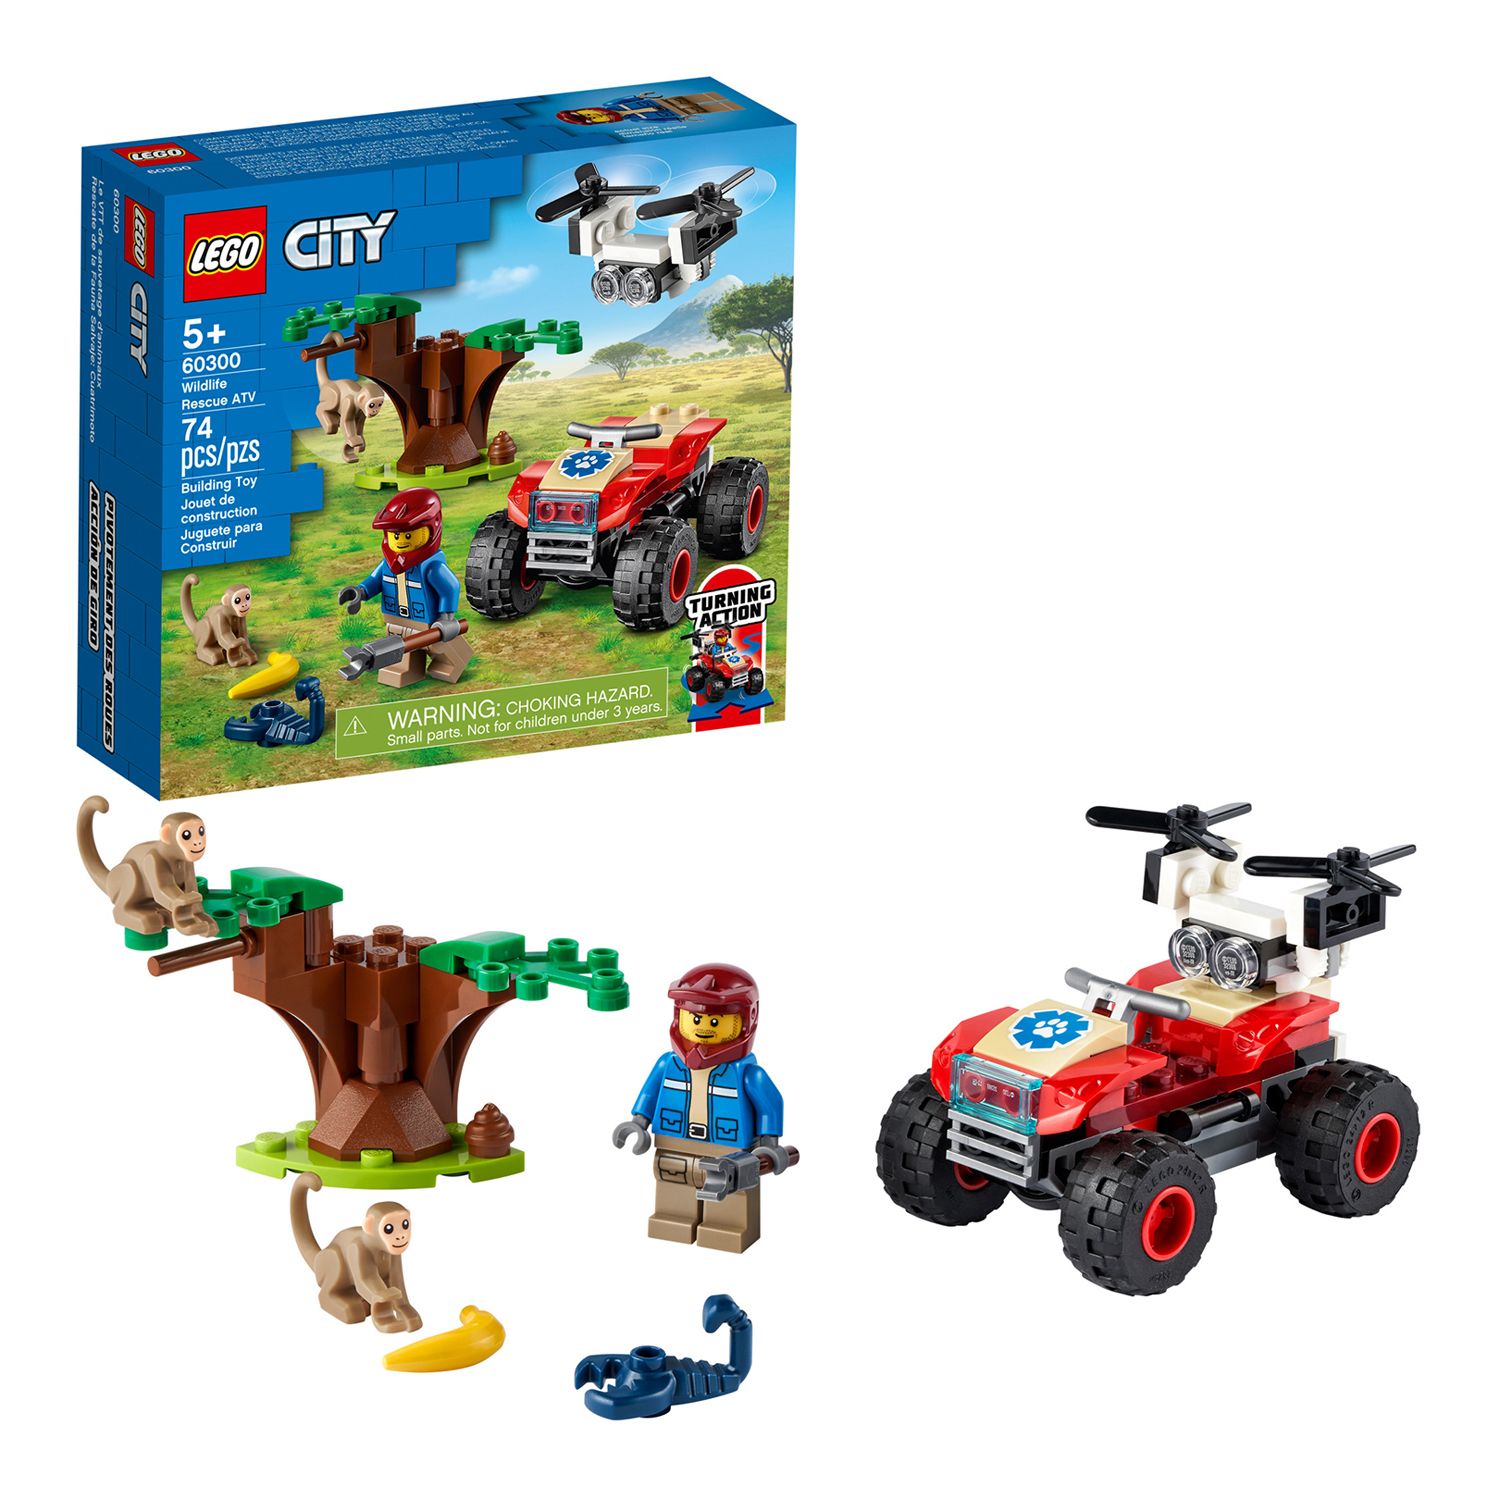 Image for LEGO City Wildlife Rescue ATV 60300 Building Kit (74 Pieces) at Kohl's.